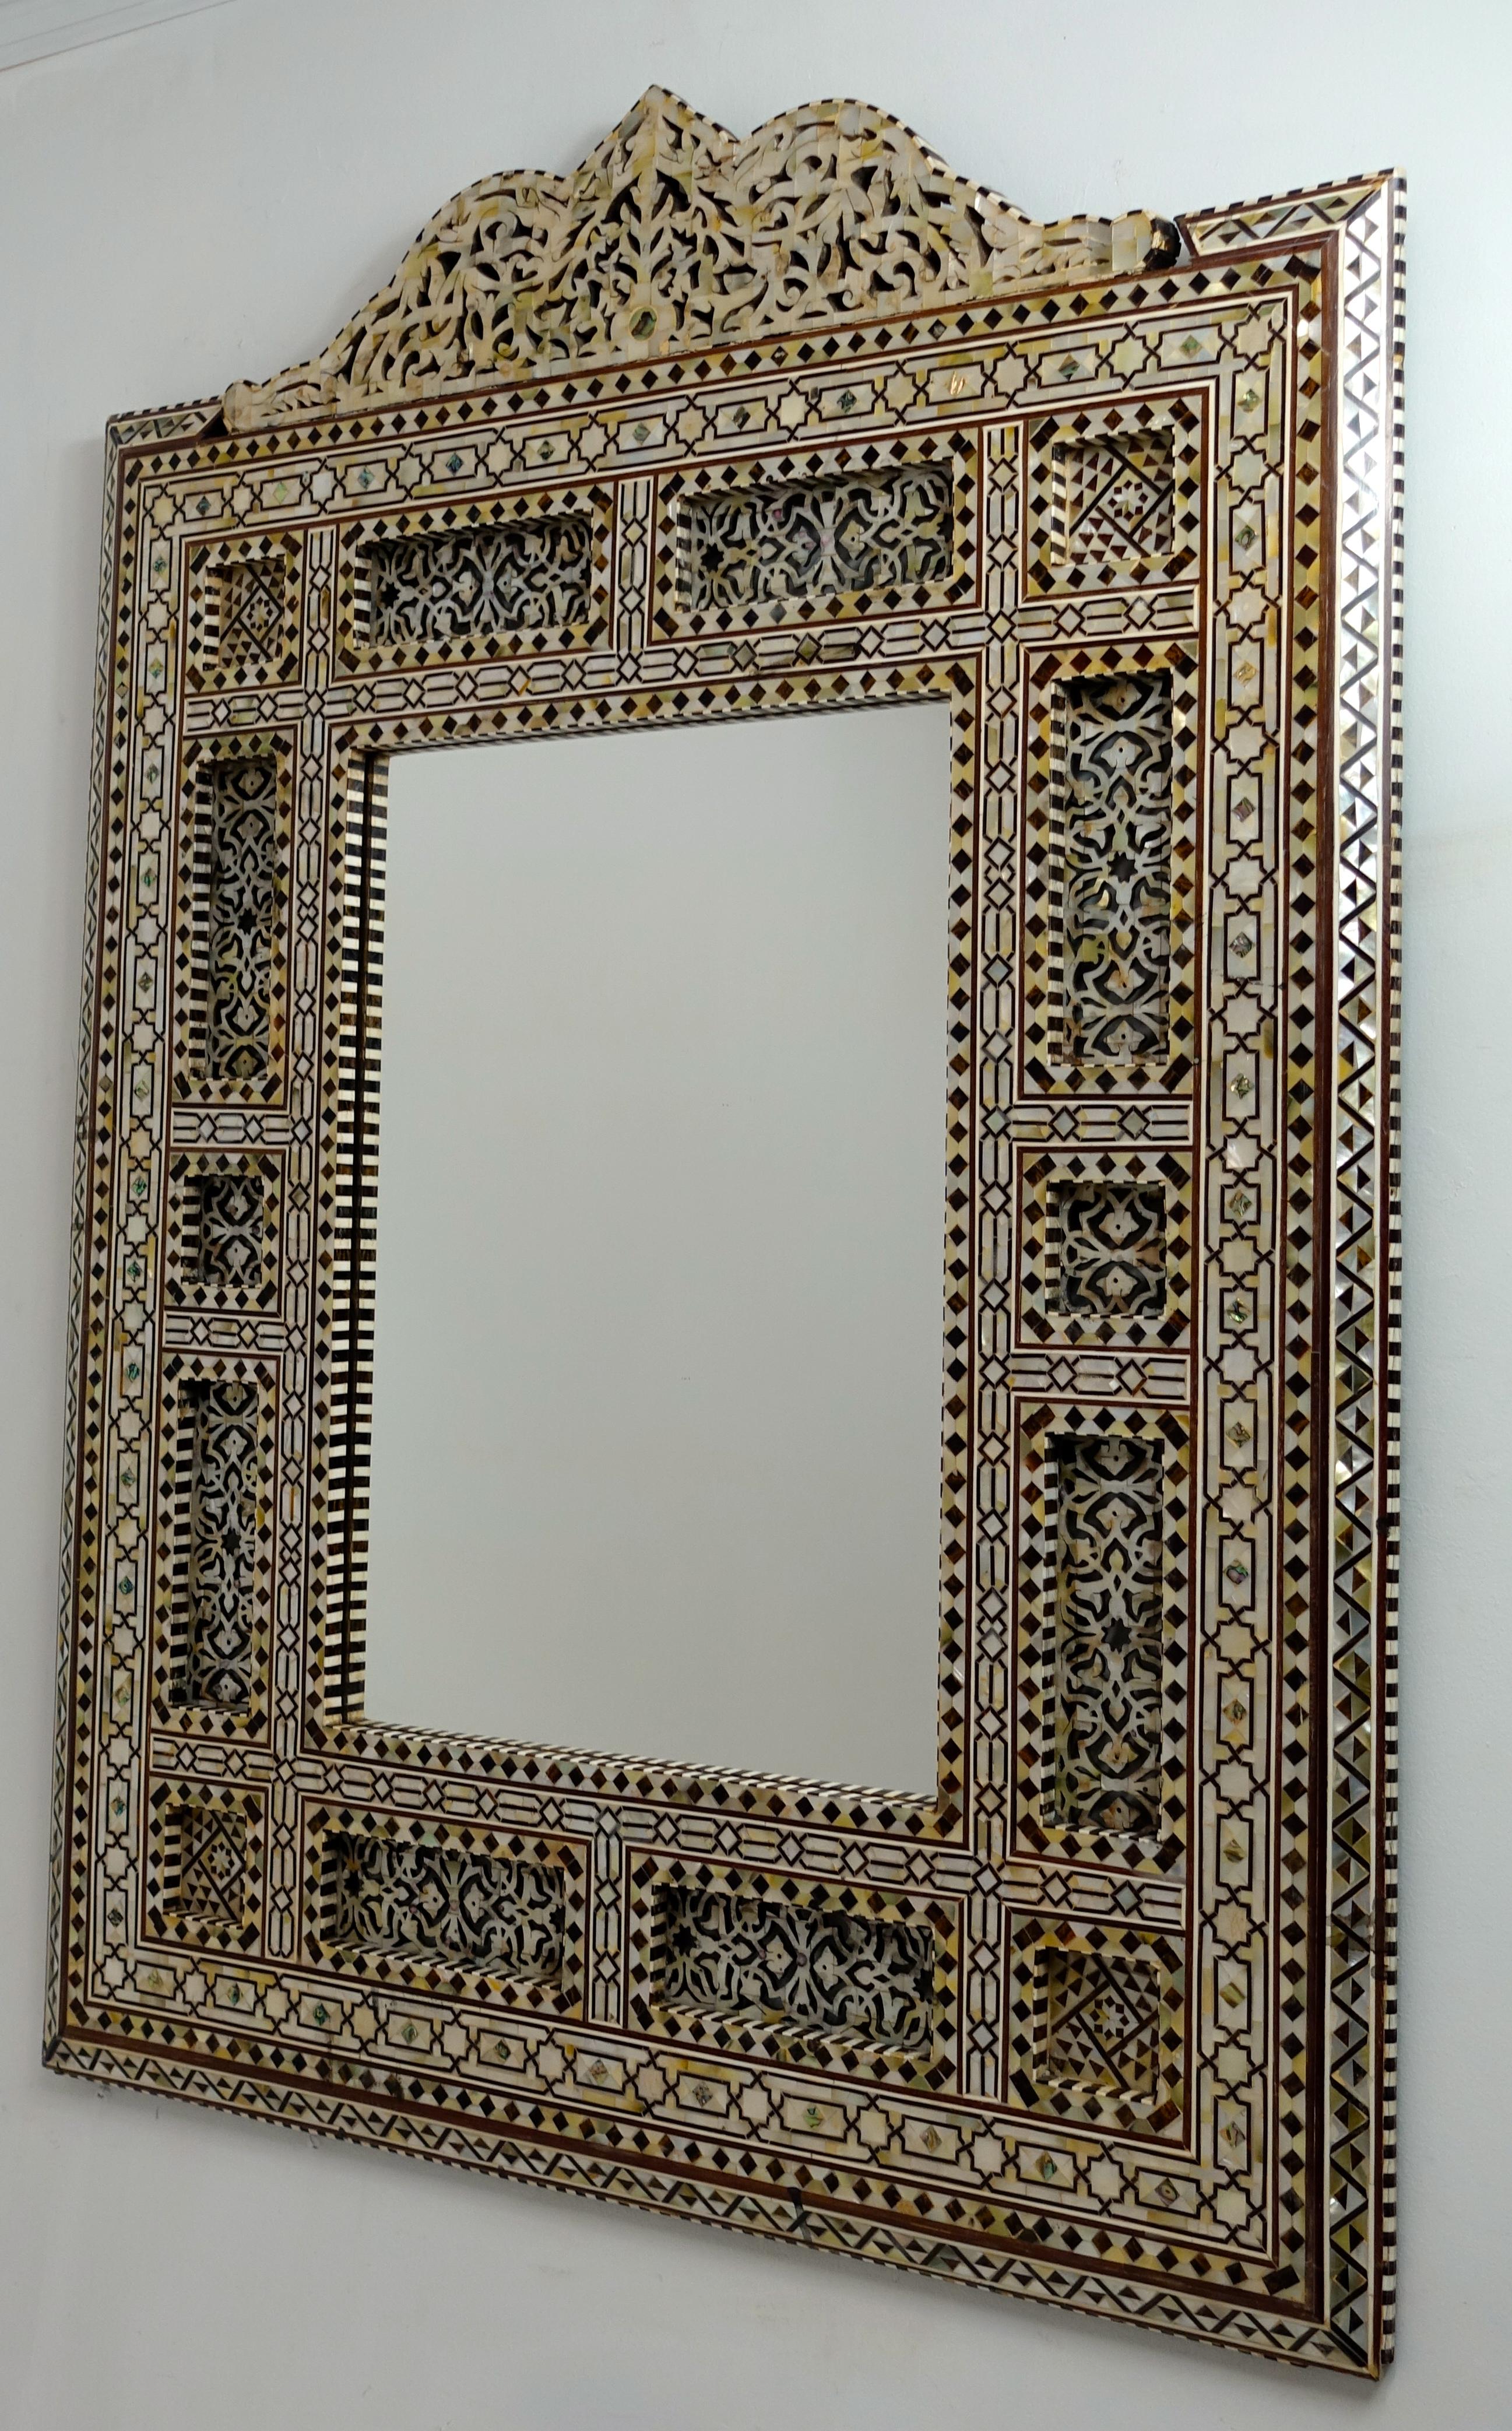 Elorborate Inlayed Syrian Frame with Mirror 2